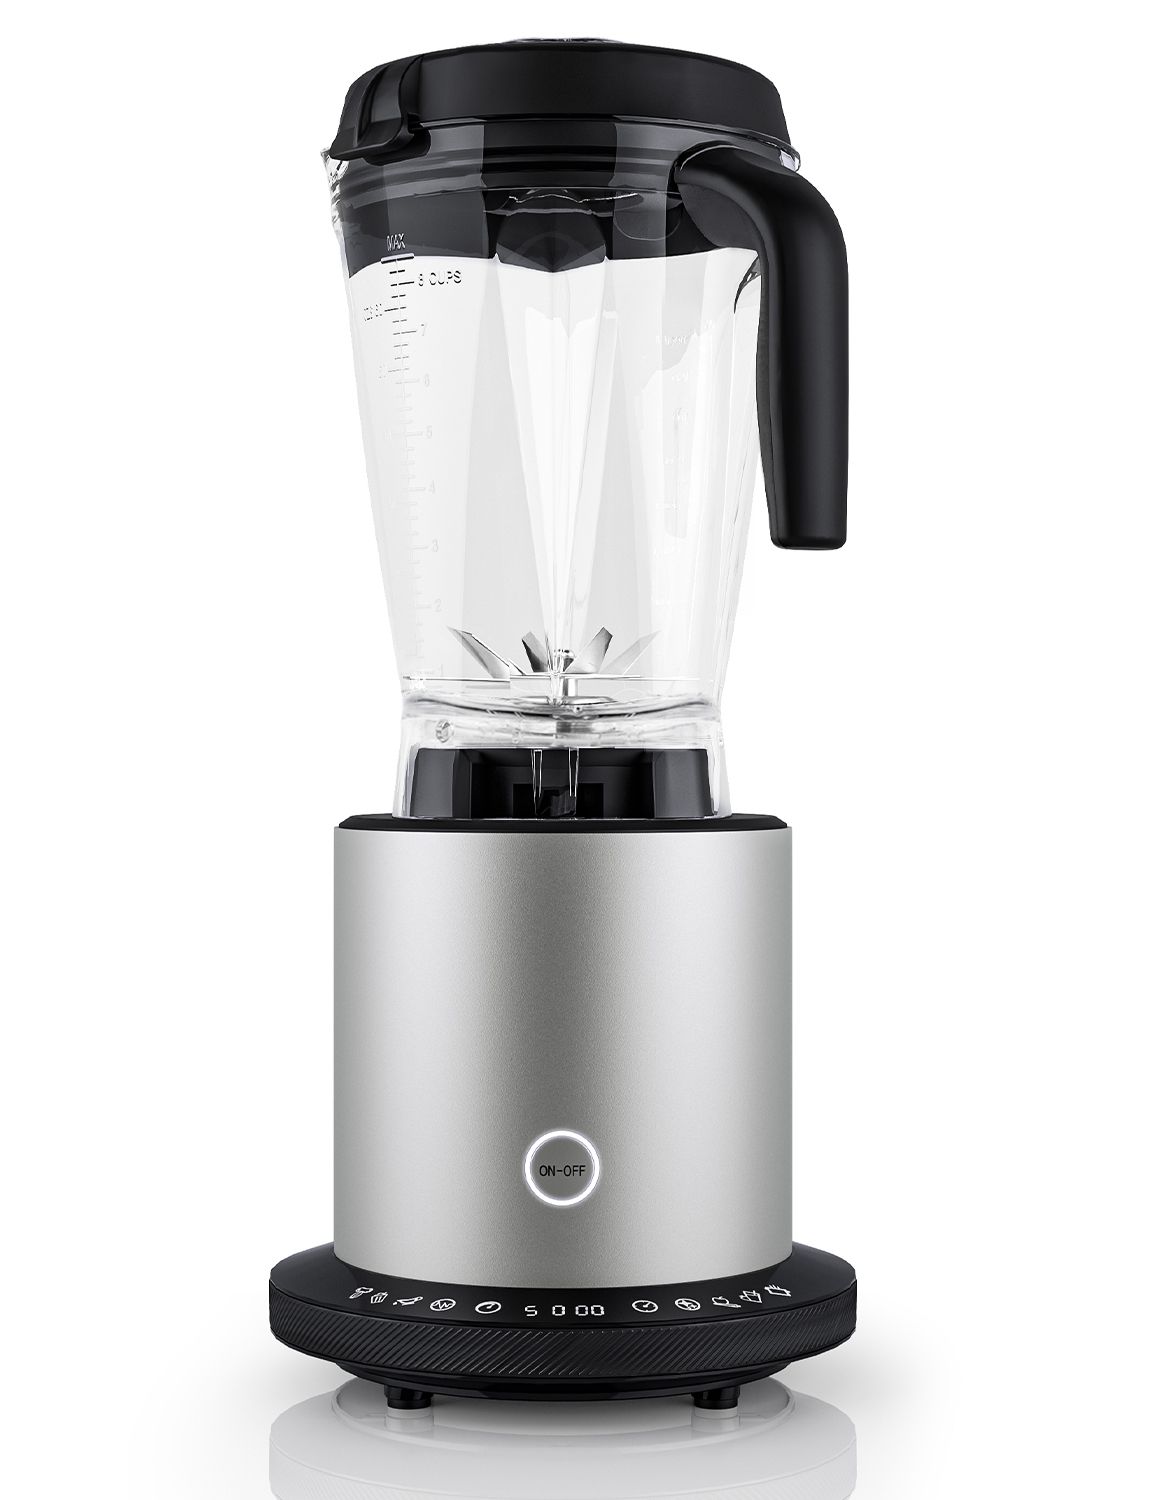 Cozy Buy Online KOIOS 850W Personal Blender for Shakes and Smoothies